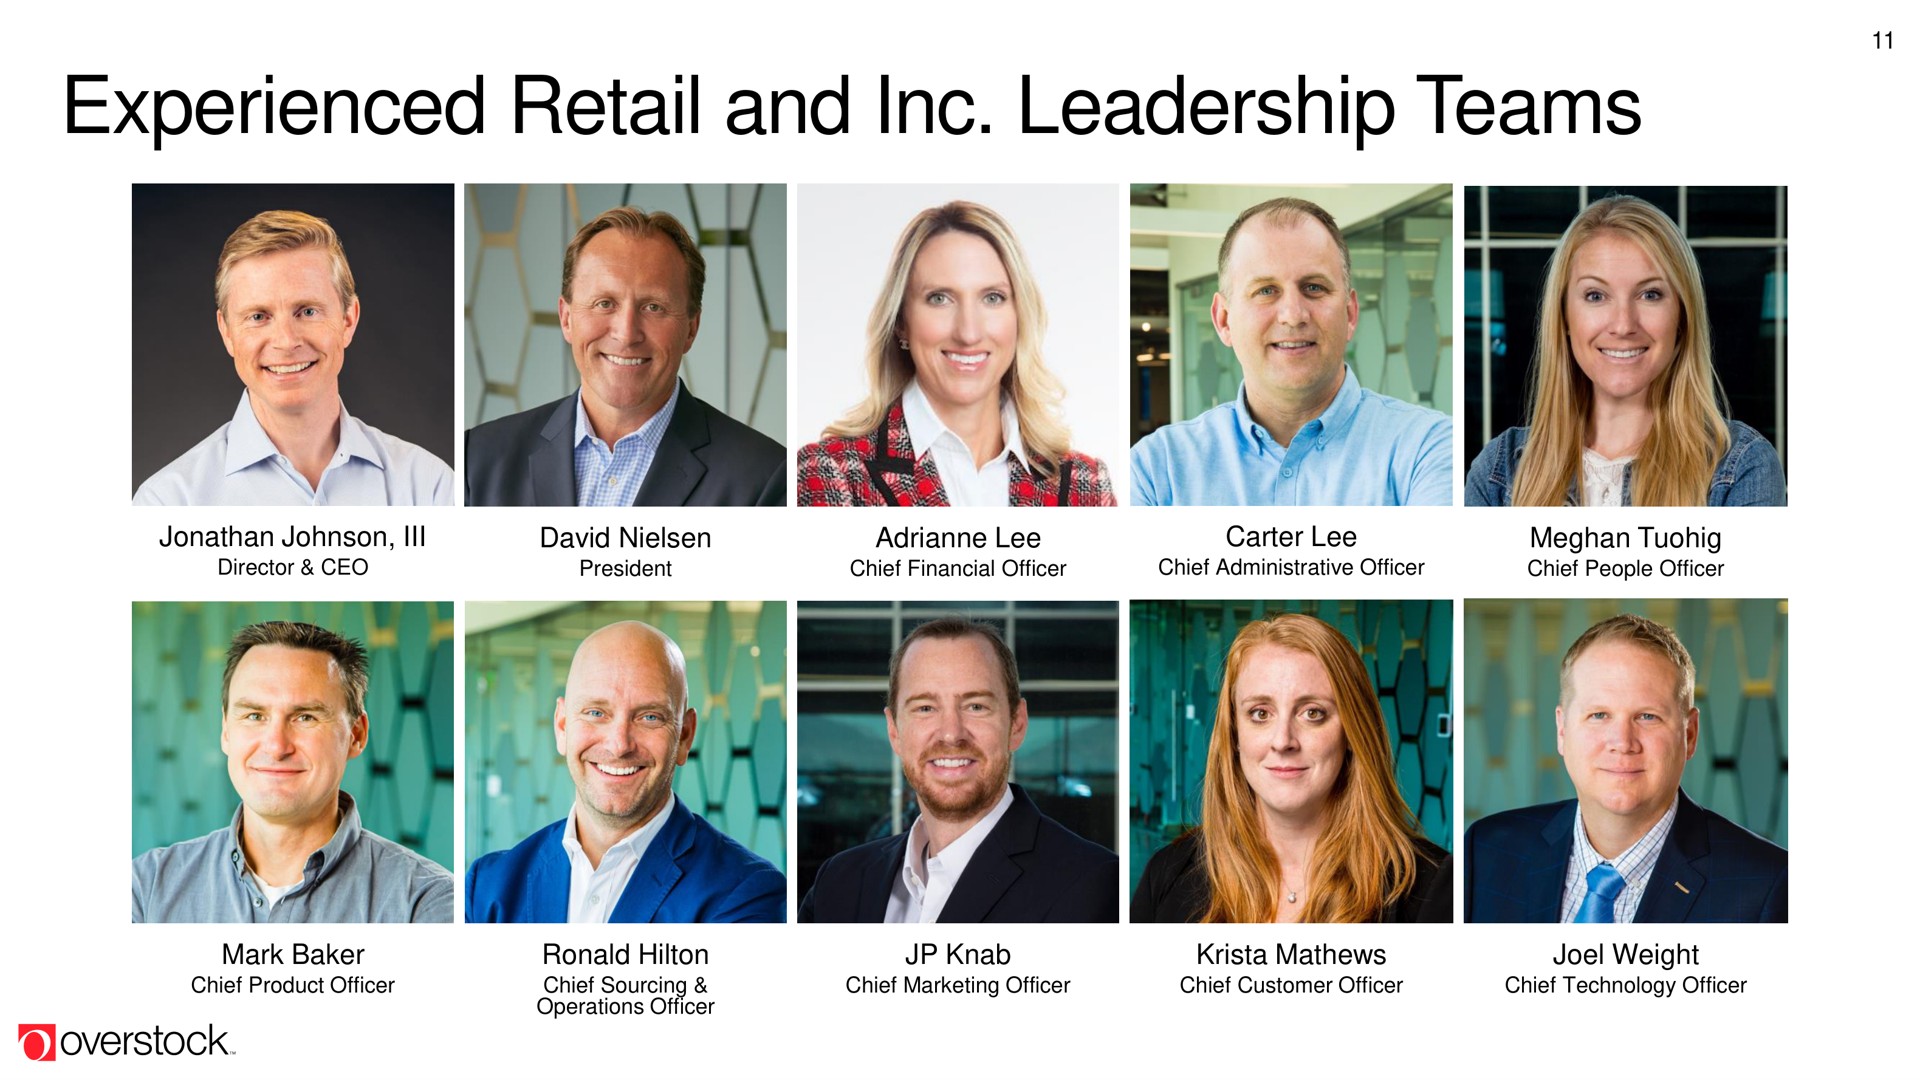 experienced retail and leadership teams | Overstock